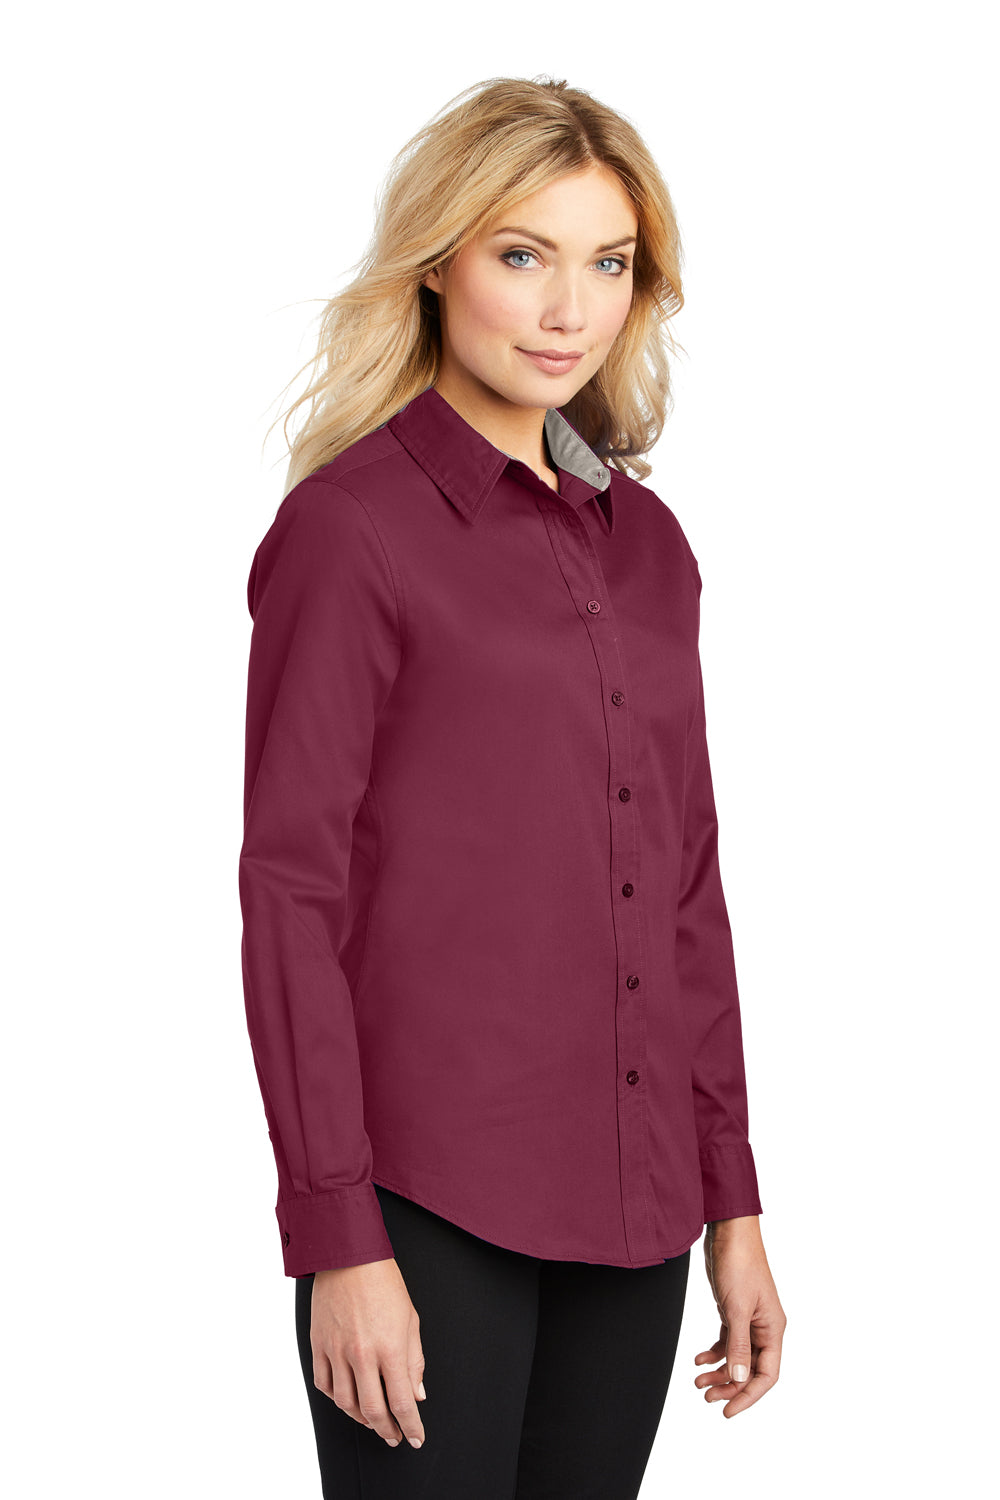 Port Authority L608 Womens Easy Care Wrinkle Resistant Long Sleeve Button Down Shirt Burgundy 3Q